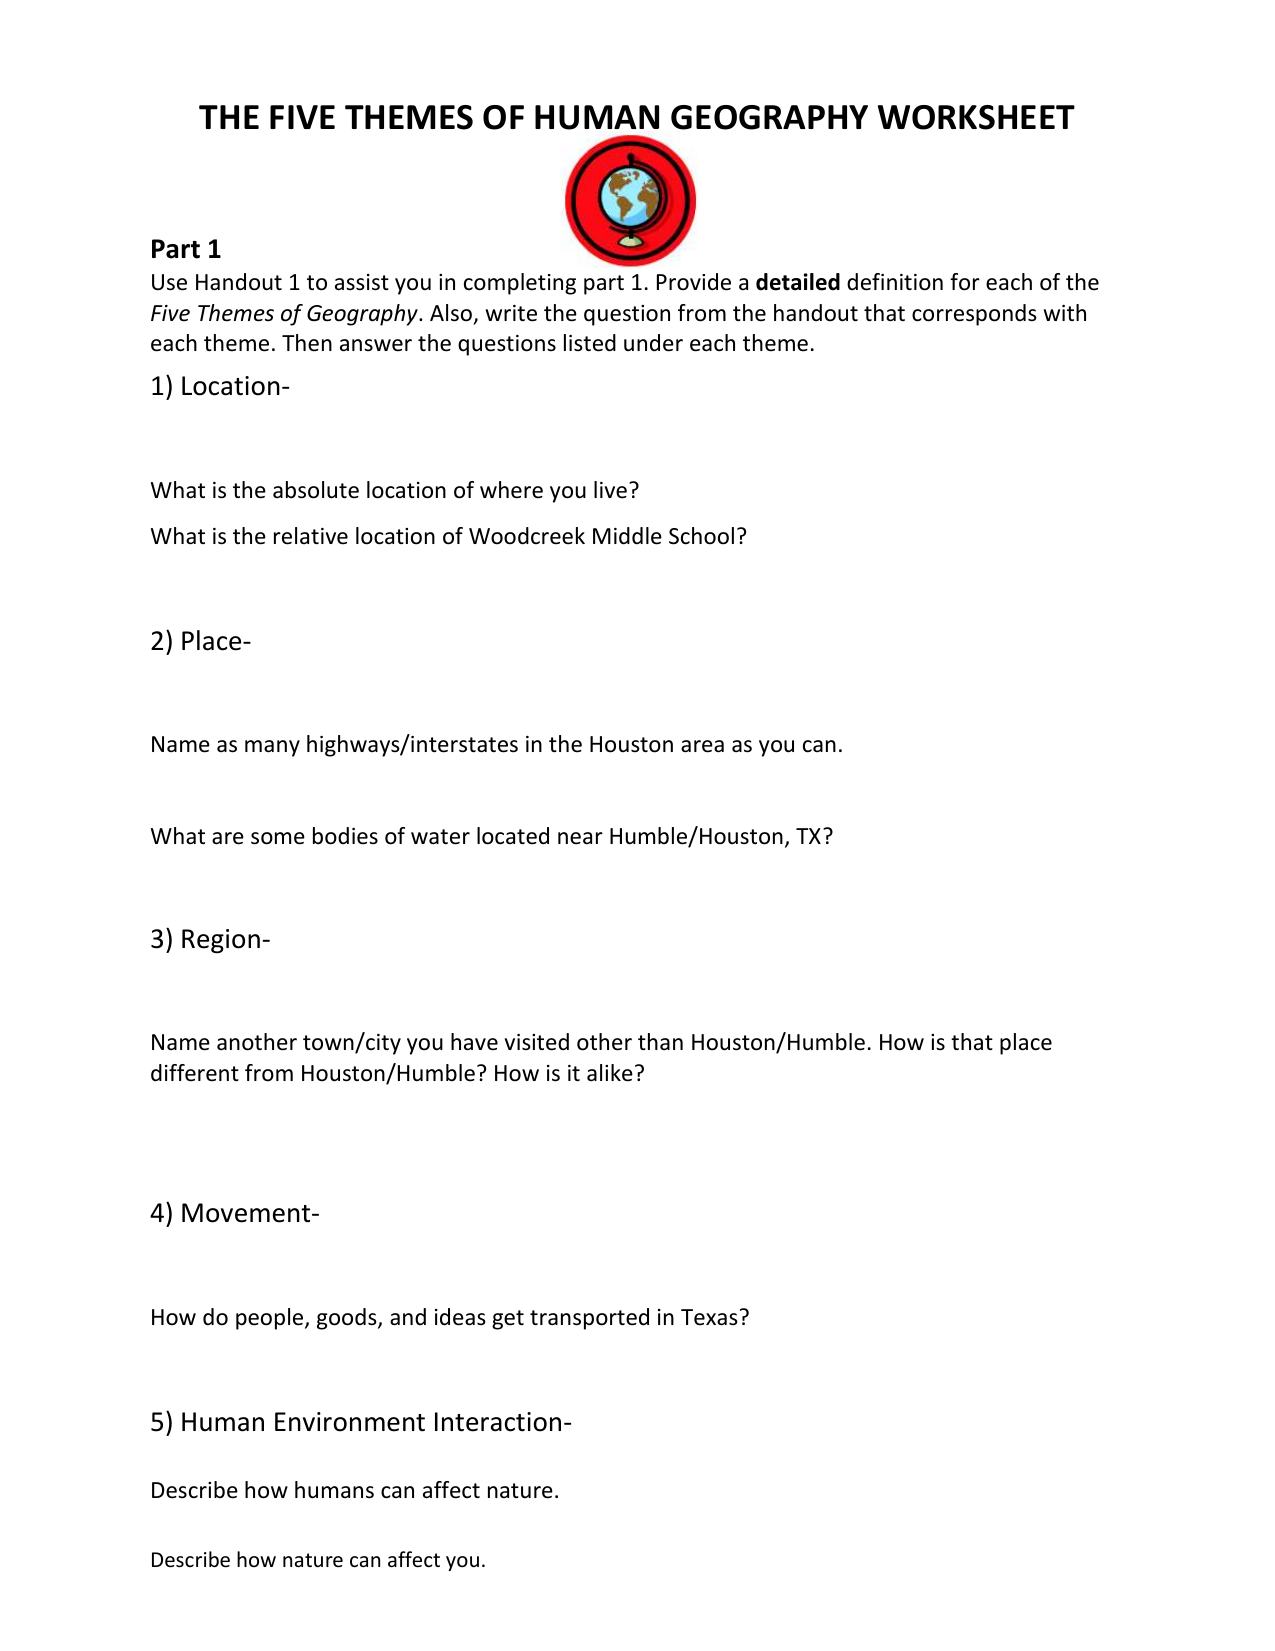 THE FIVE THEMES OF HUMAN GEOGRAPHY WORKSHEET Part 25 For 5 Themes Of Geography Worksheet